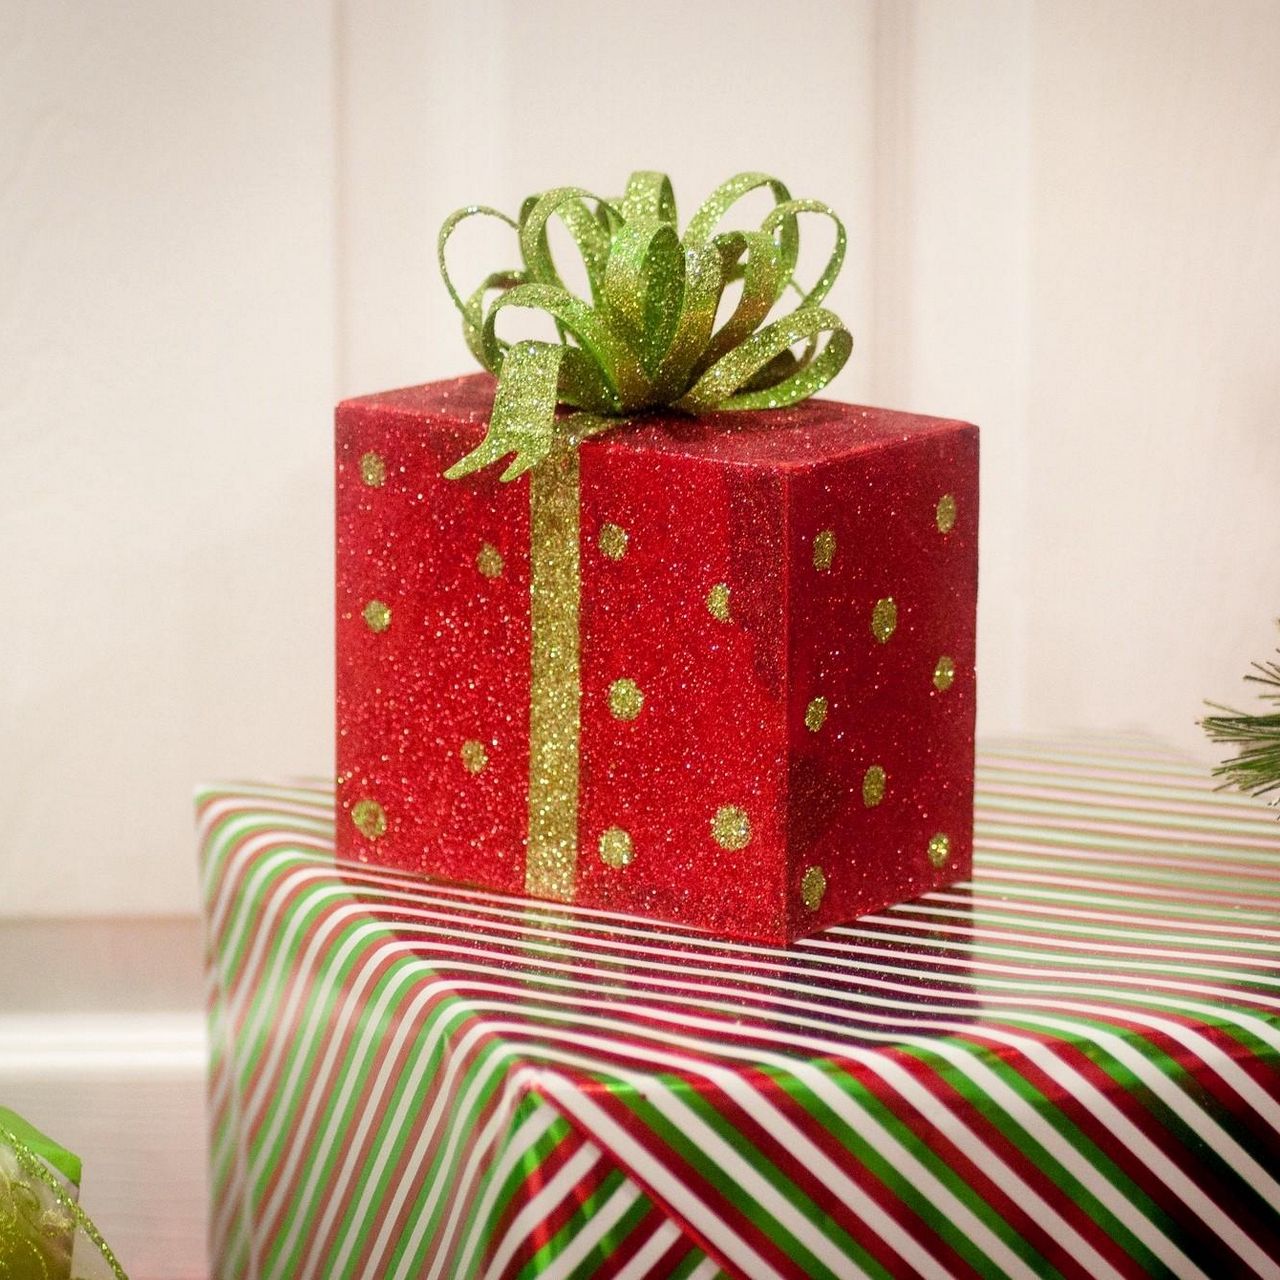 Download wallpaper 1280x1280 gifts, boxes, bow-knot, glitter, holiday ipad,  ipad 2, ipad mini for parallax hd background